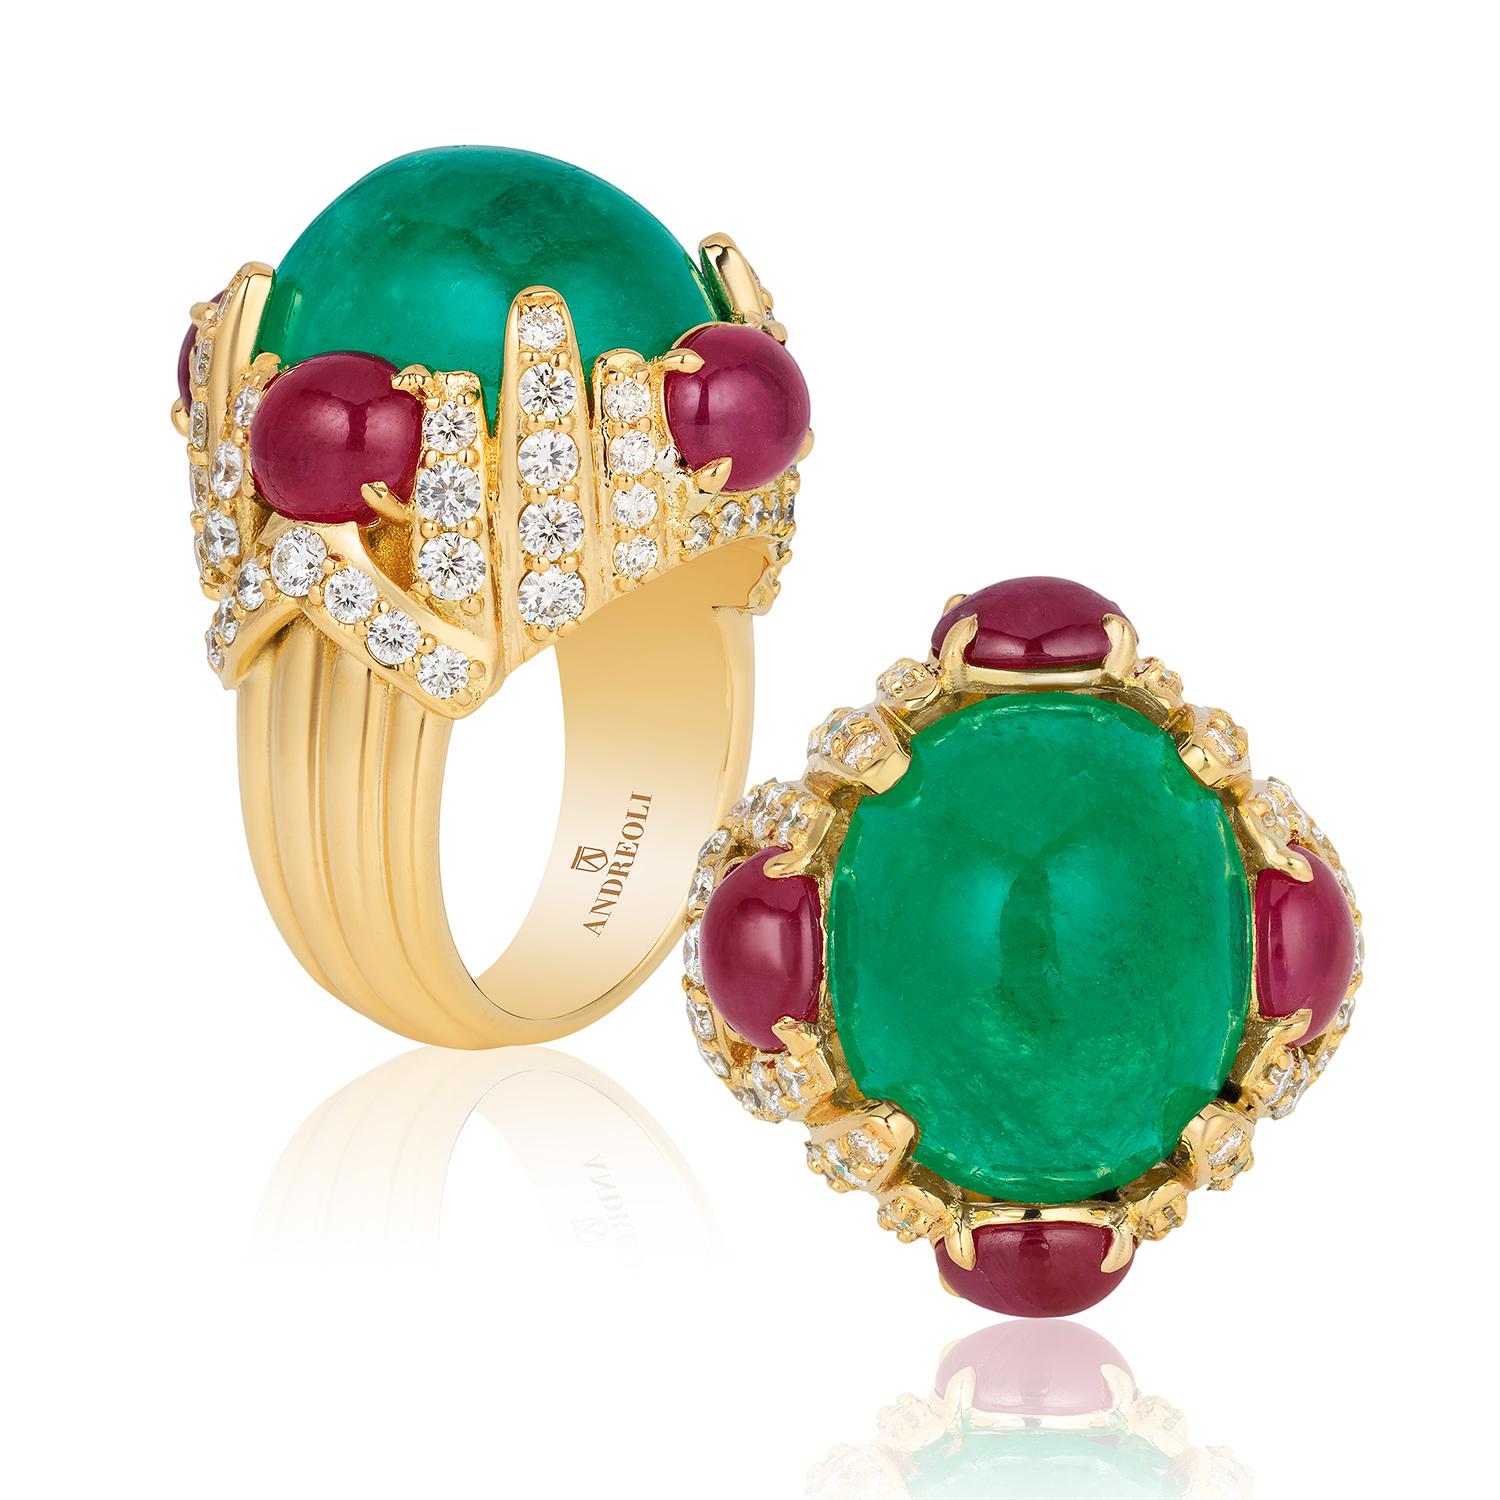 Mixed Cut Andreoli 14.53 Carat Colombian Emerald Ruby Diamond 18 Karat Yellow Gold Ring For Sale